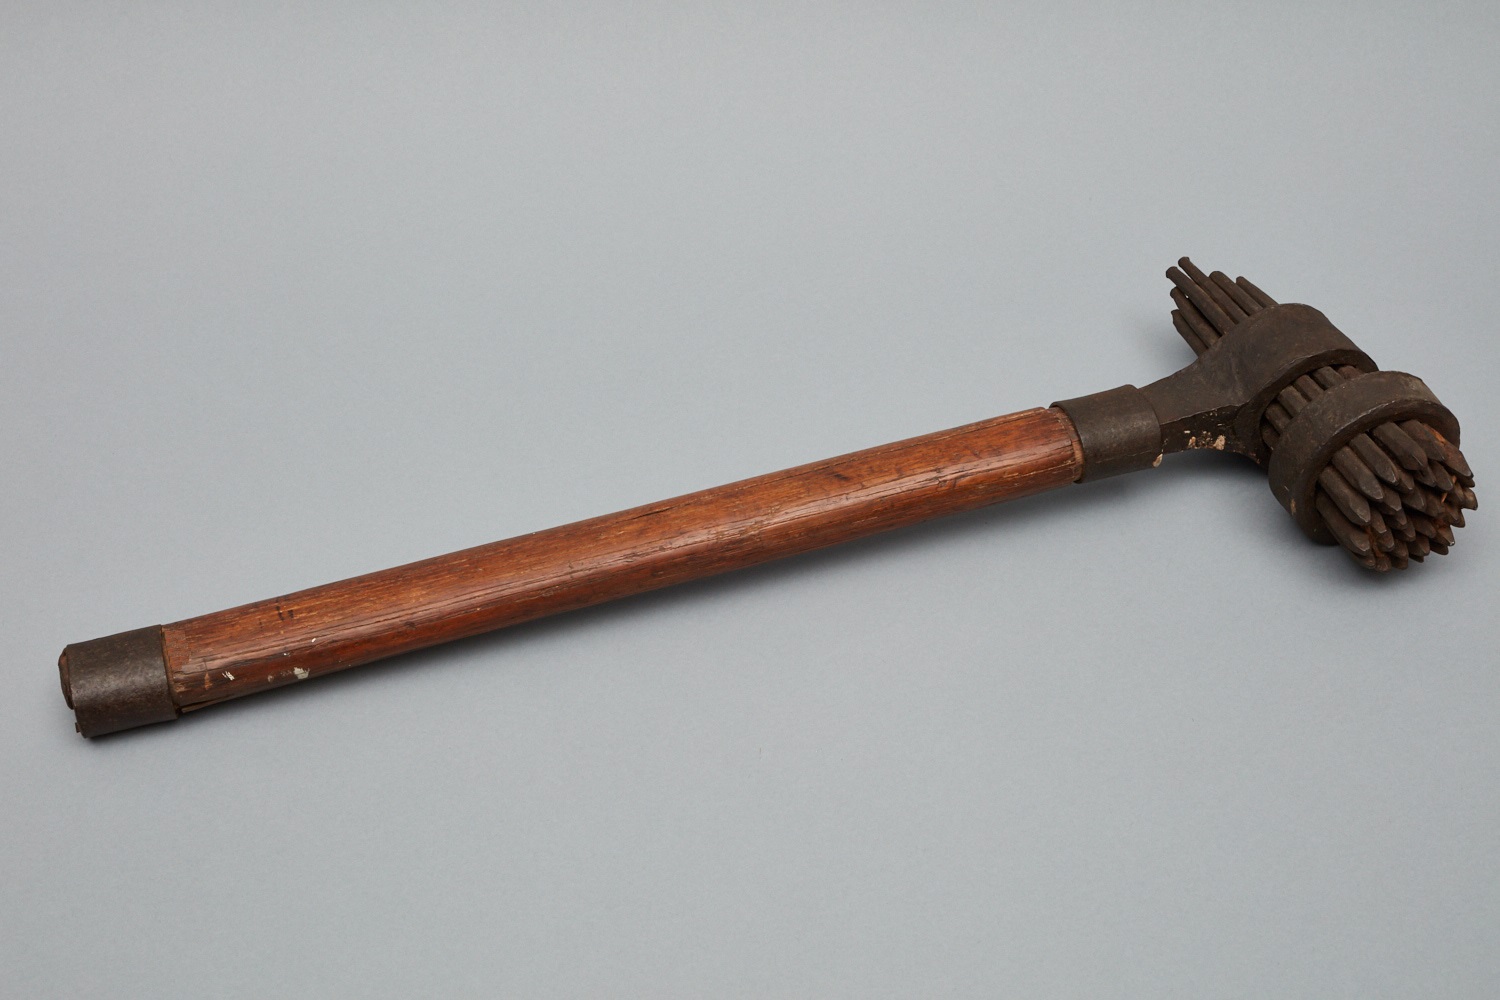 A wooden hammer with a wooden handle.